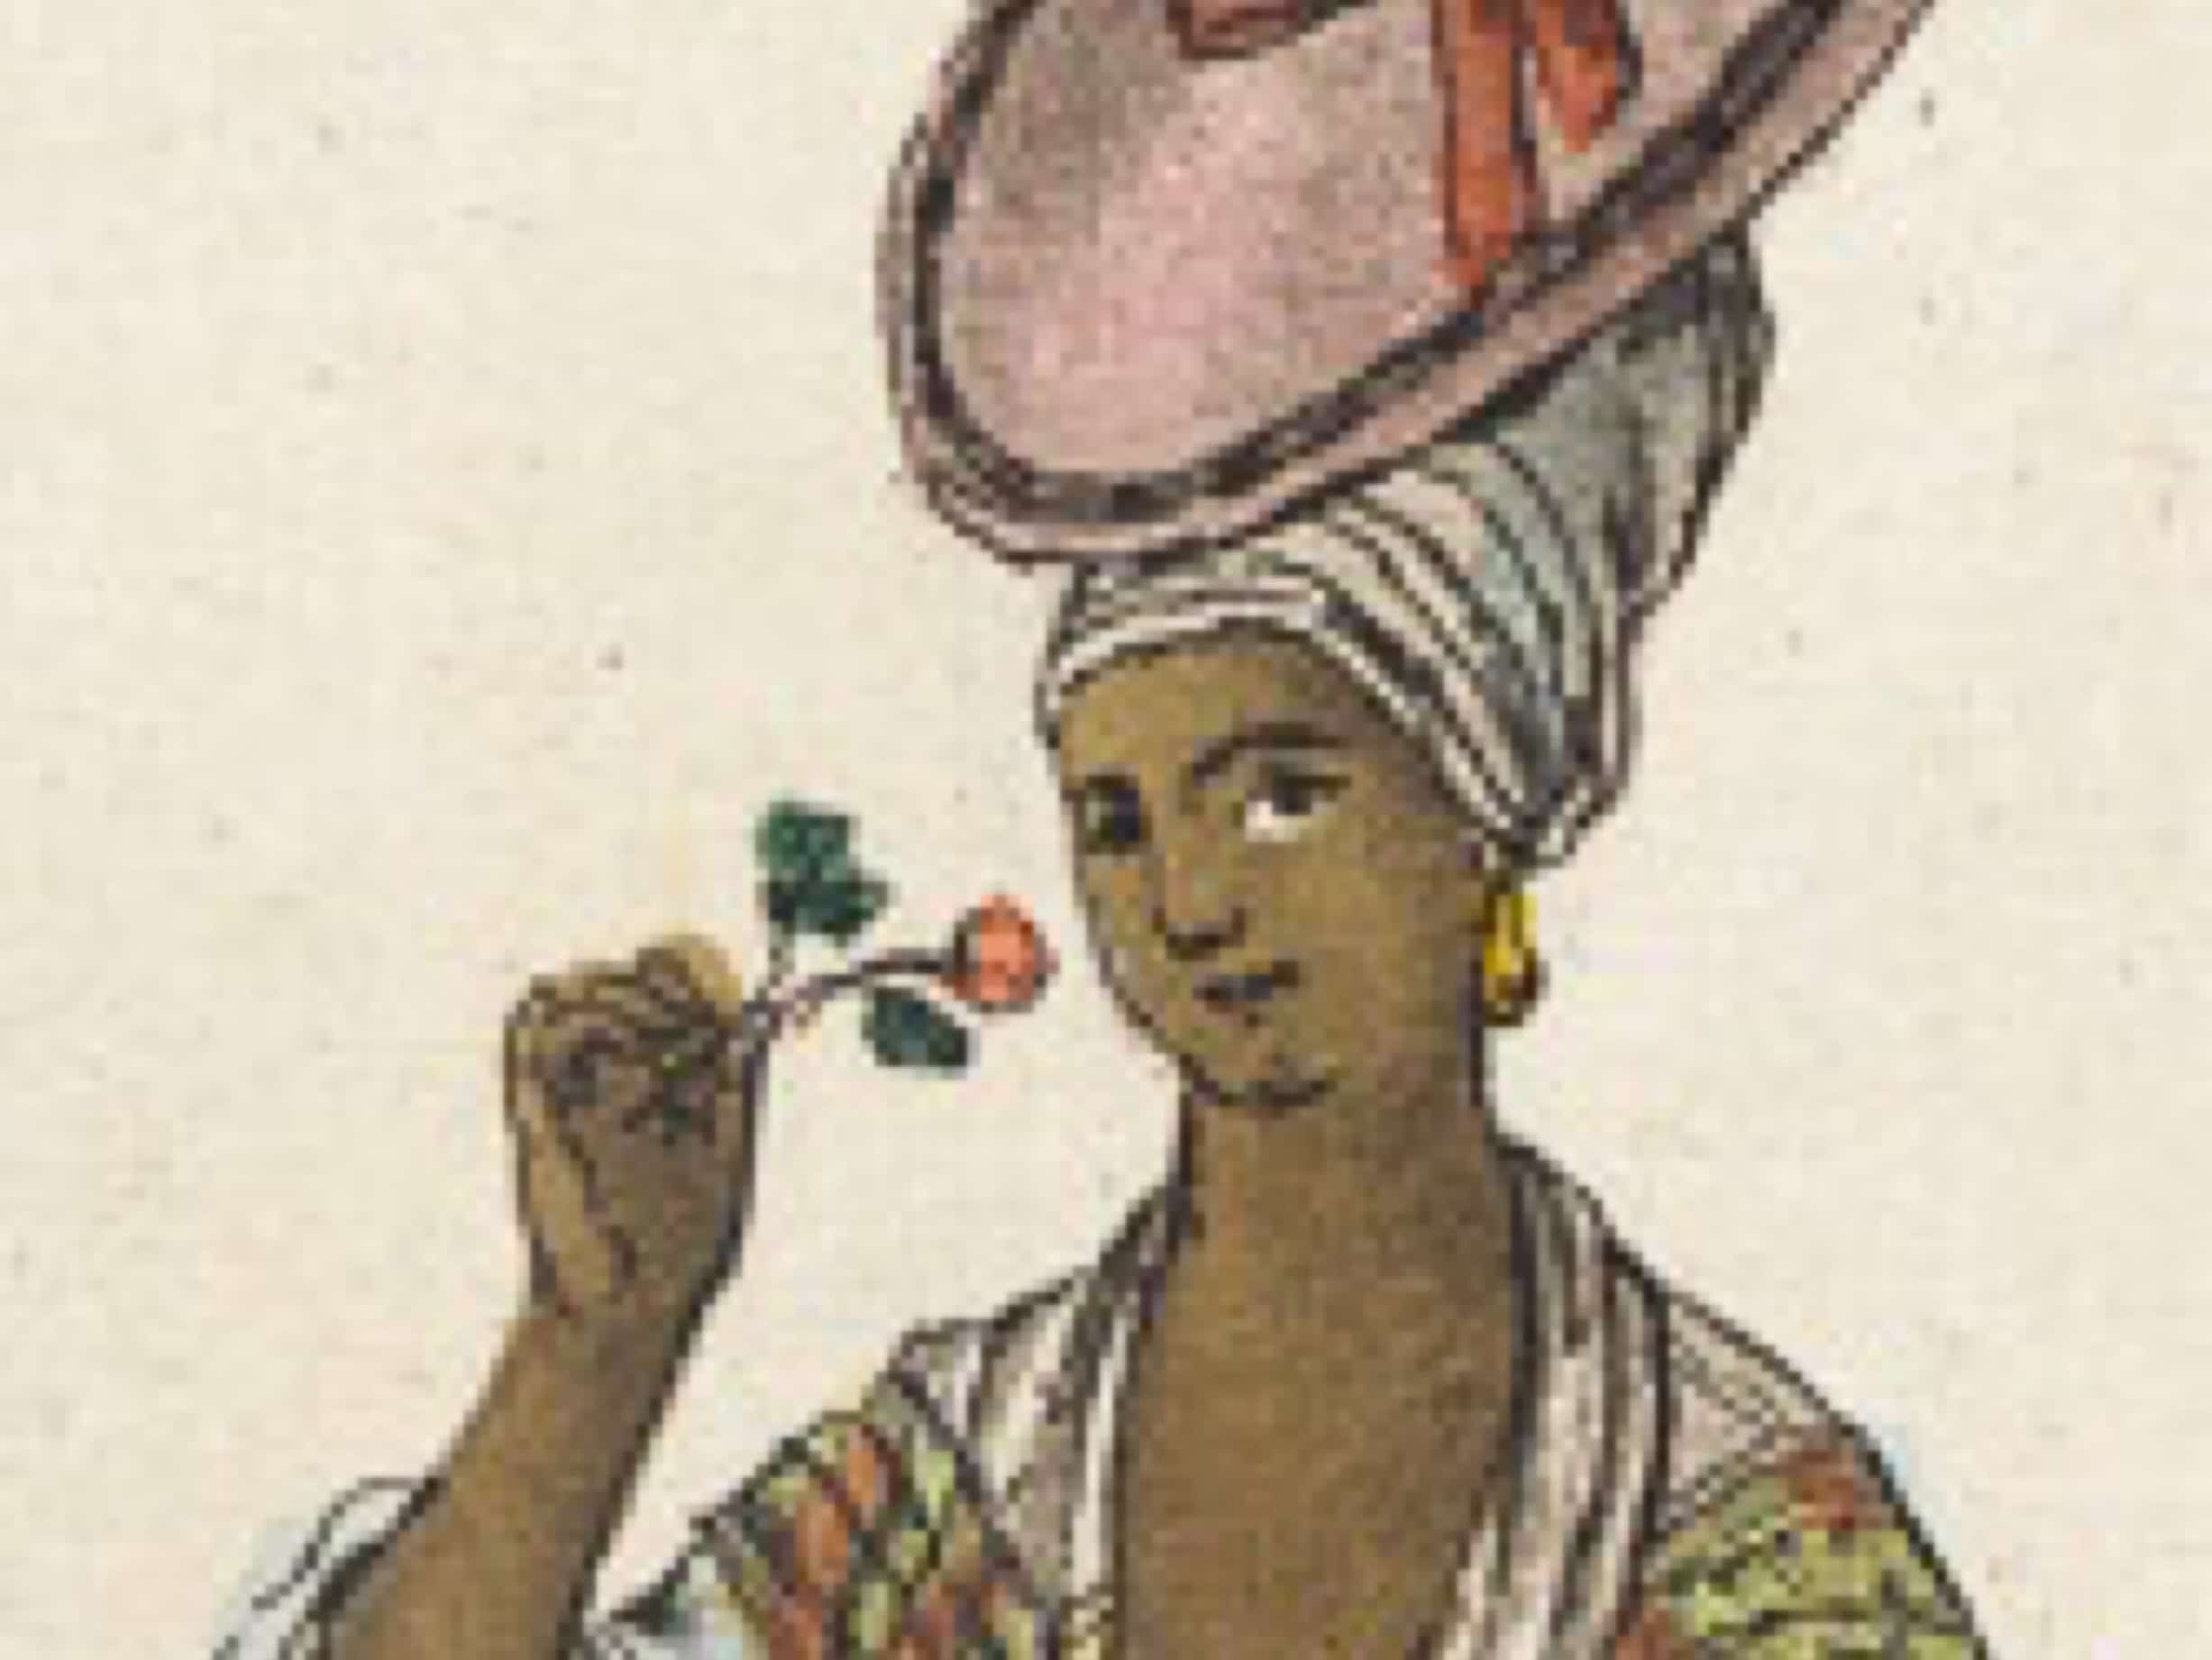 Ana Joaquina dos Santos: The Biggest Slave Trader in Angola in the 1830s